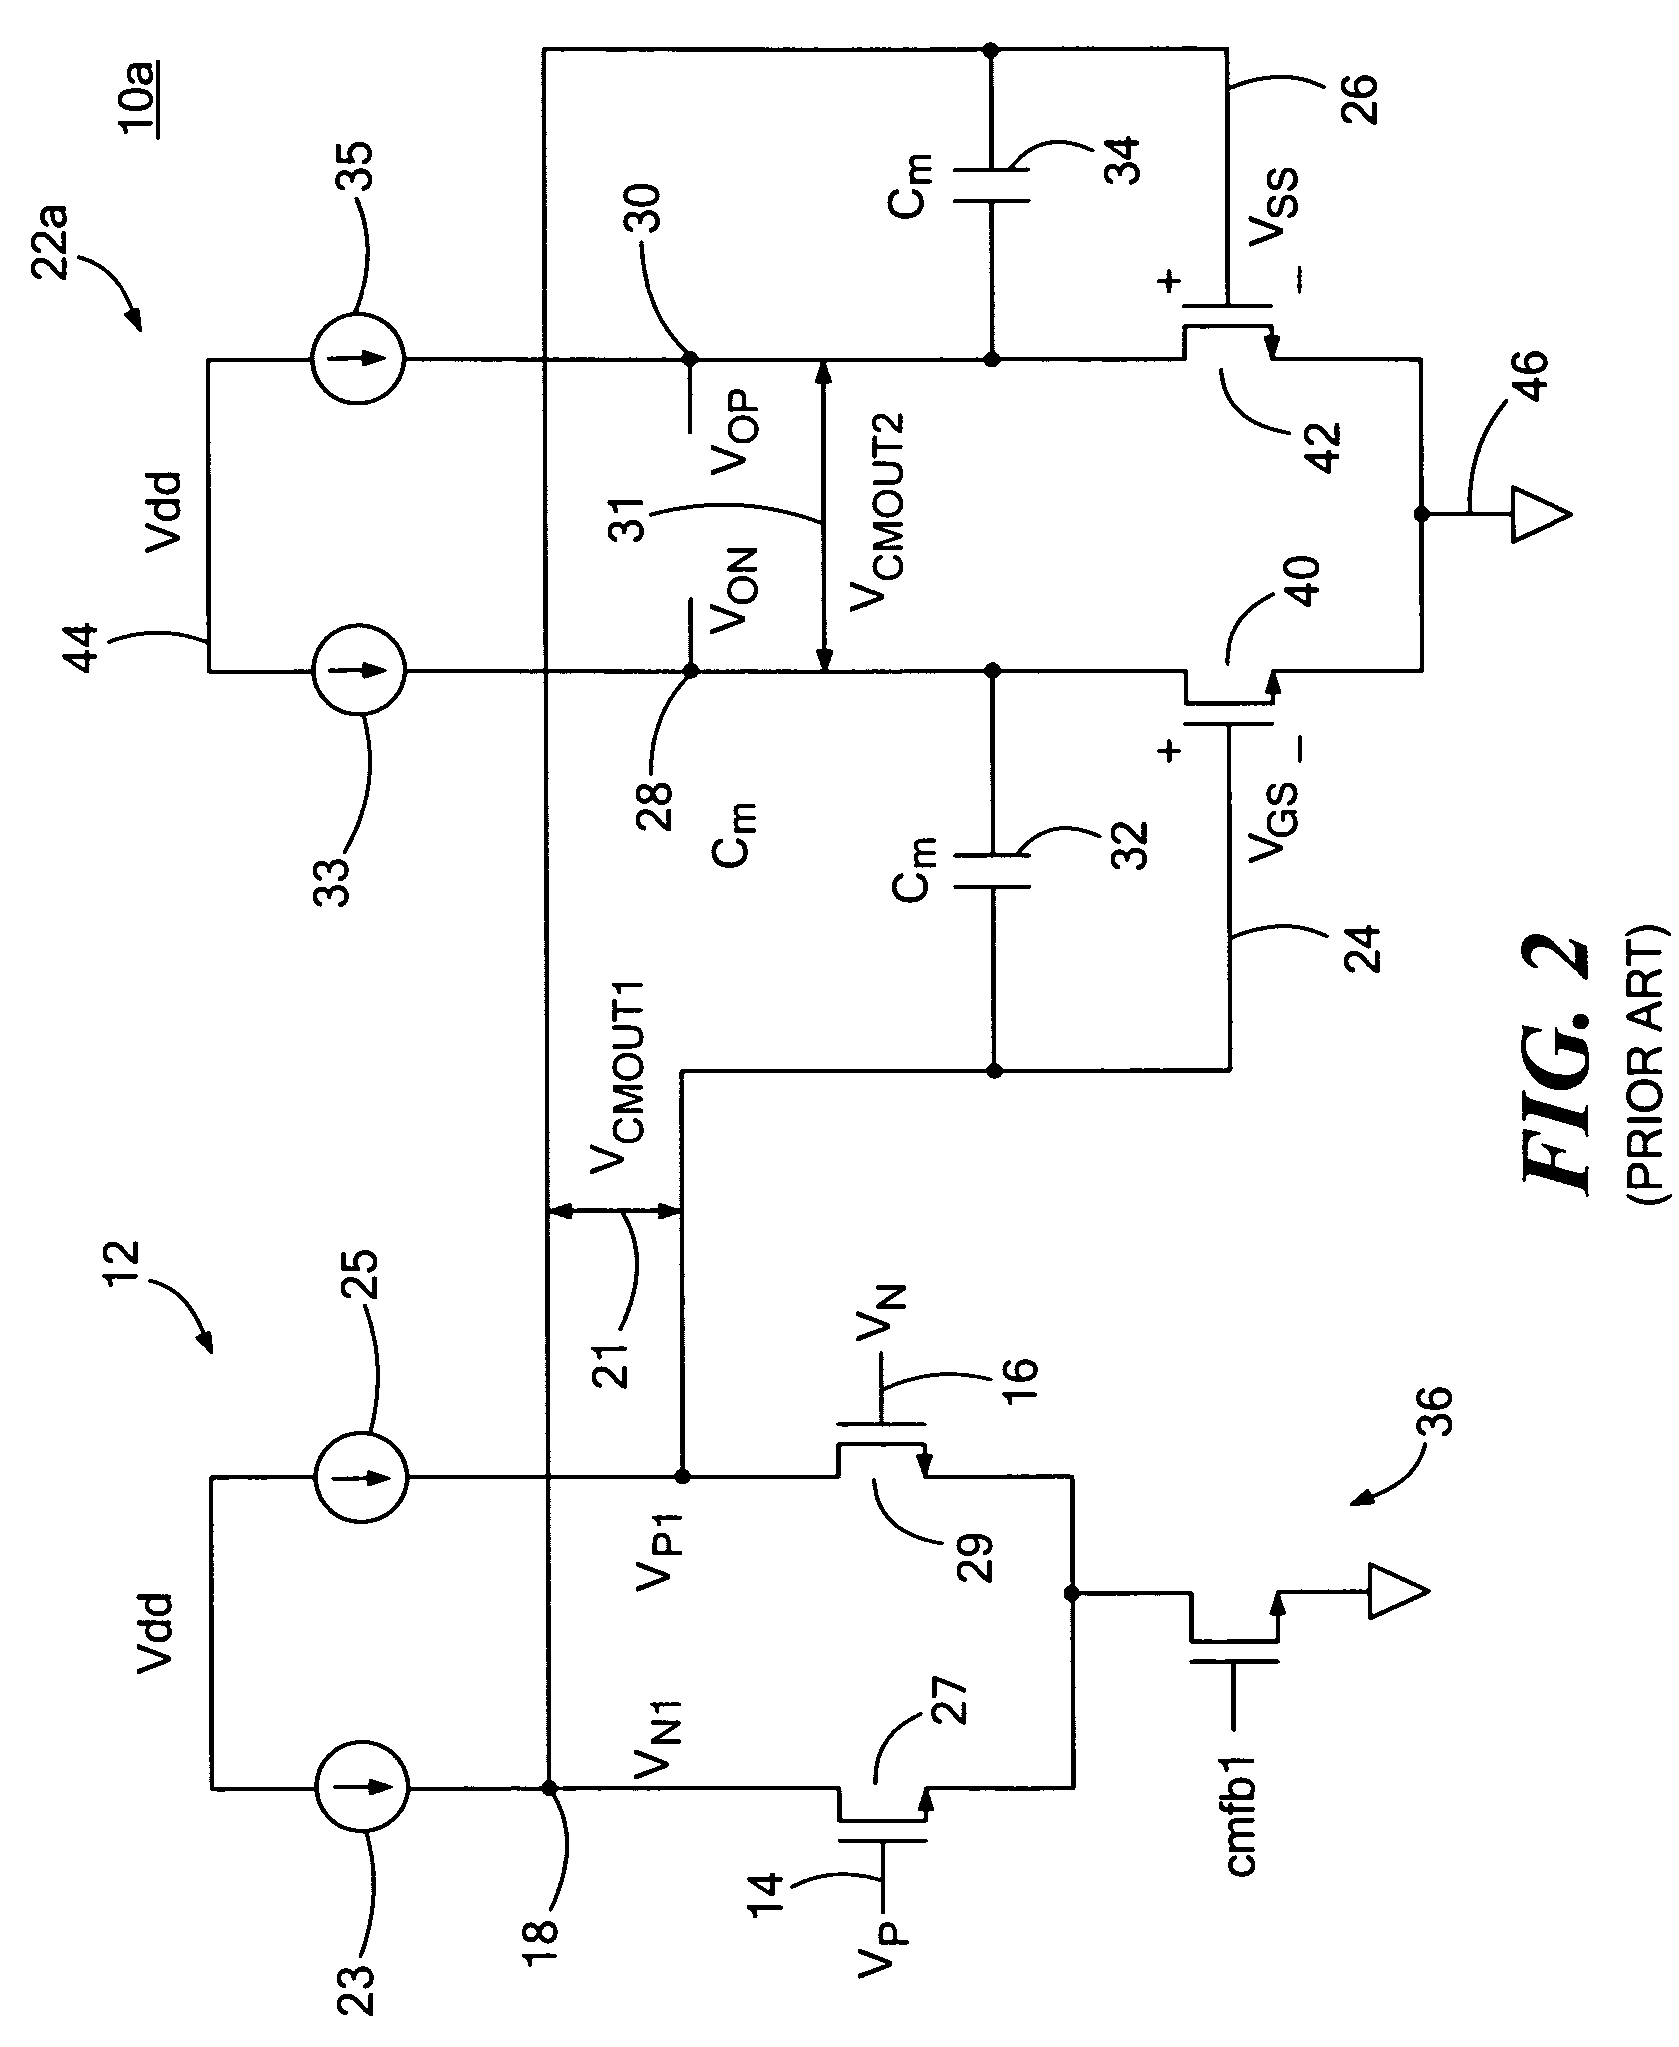 Differential two-stage miller compensated amplifier system with capacitive level shifting